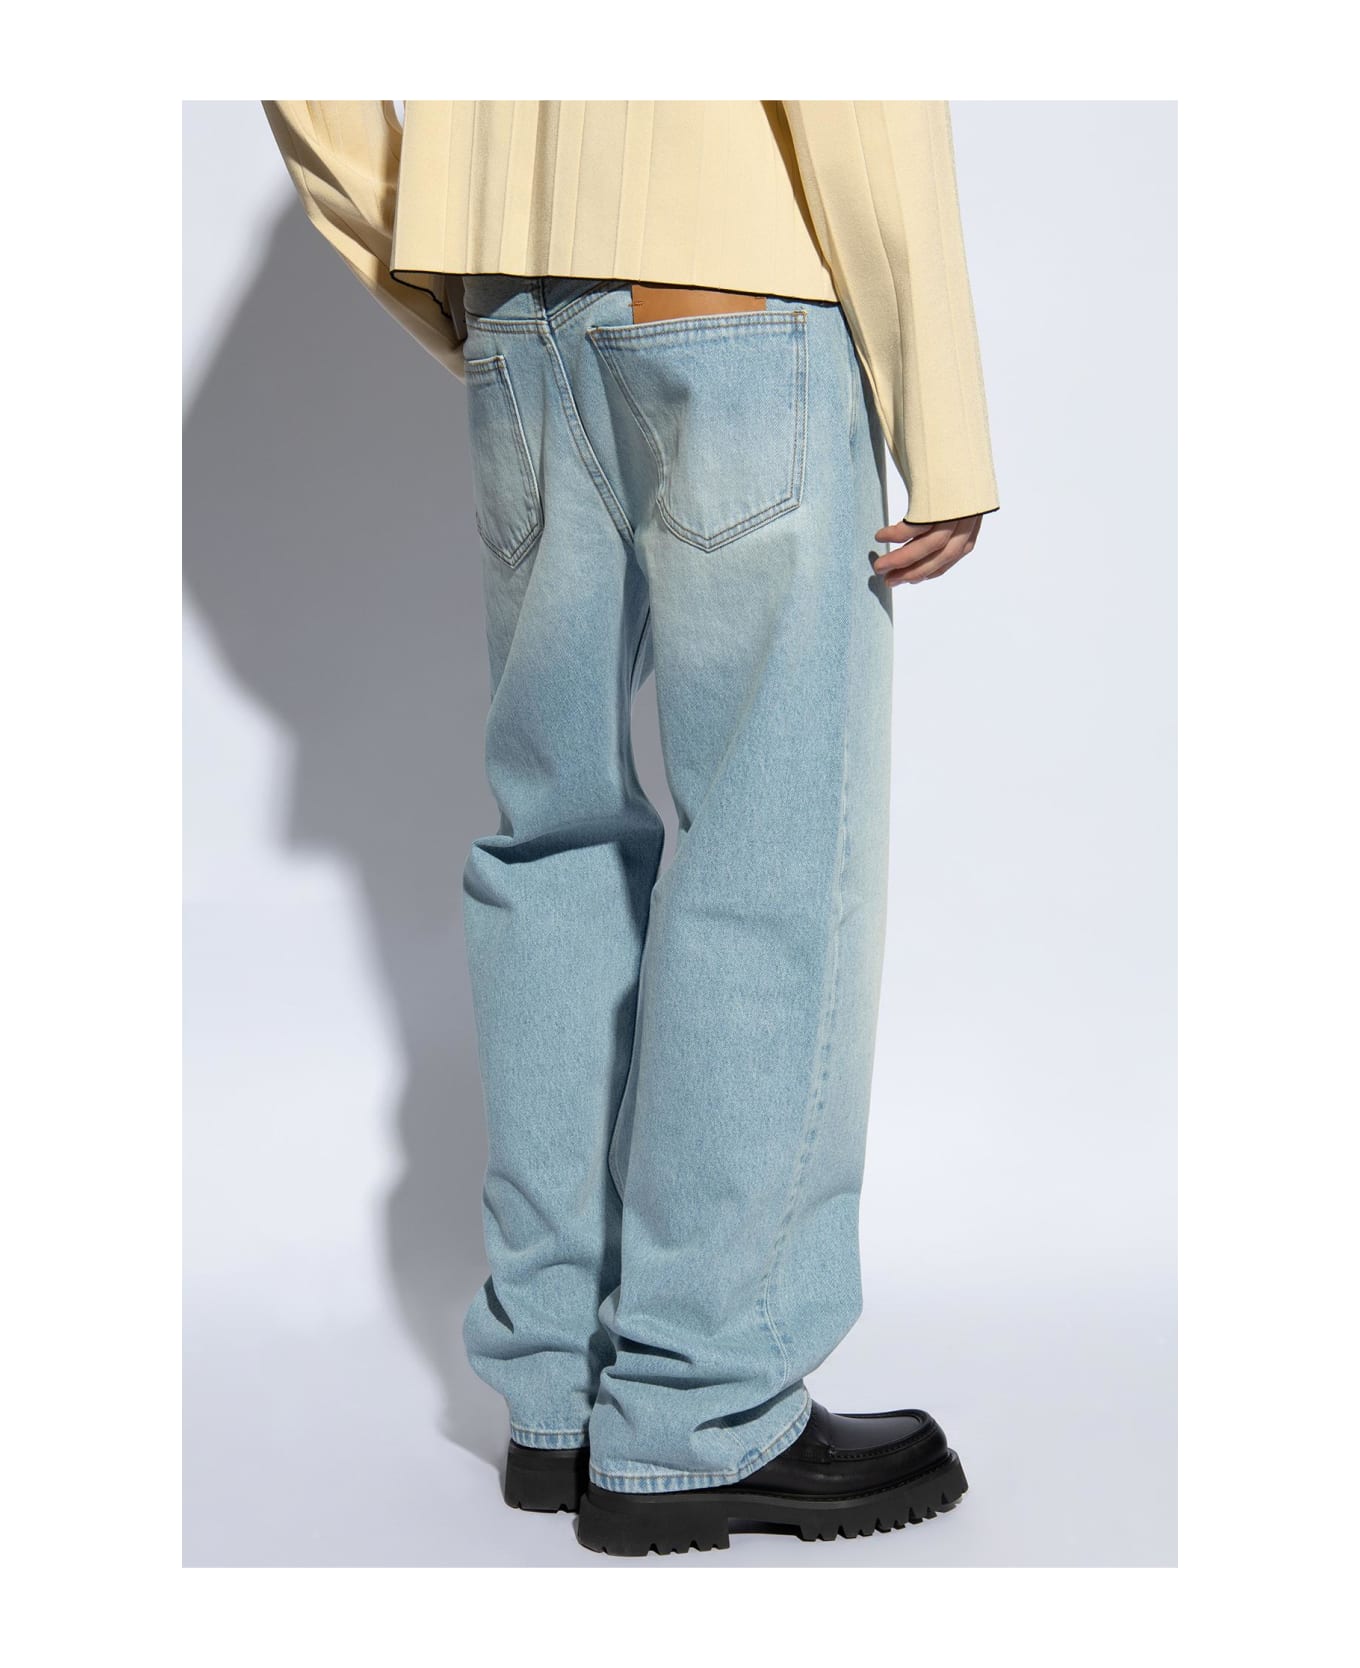 Jacquemus Jeans With Straight Legs - BLUE